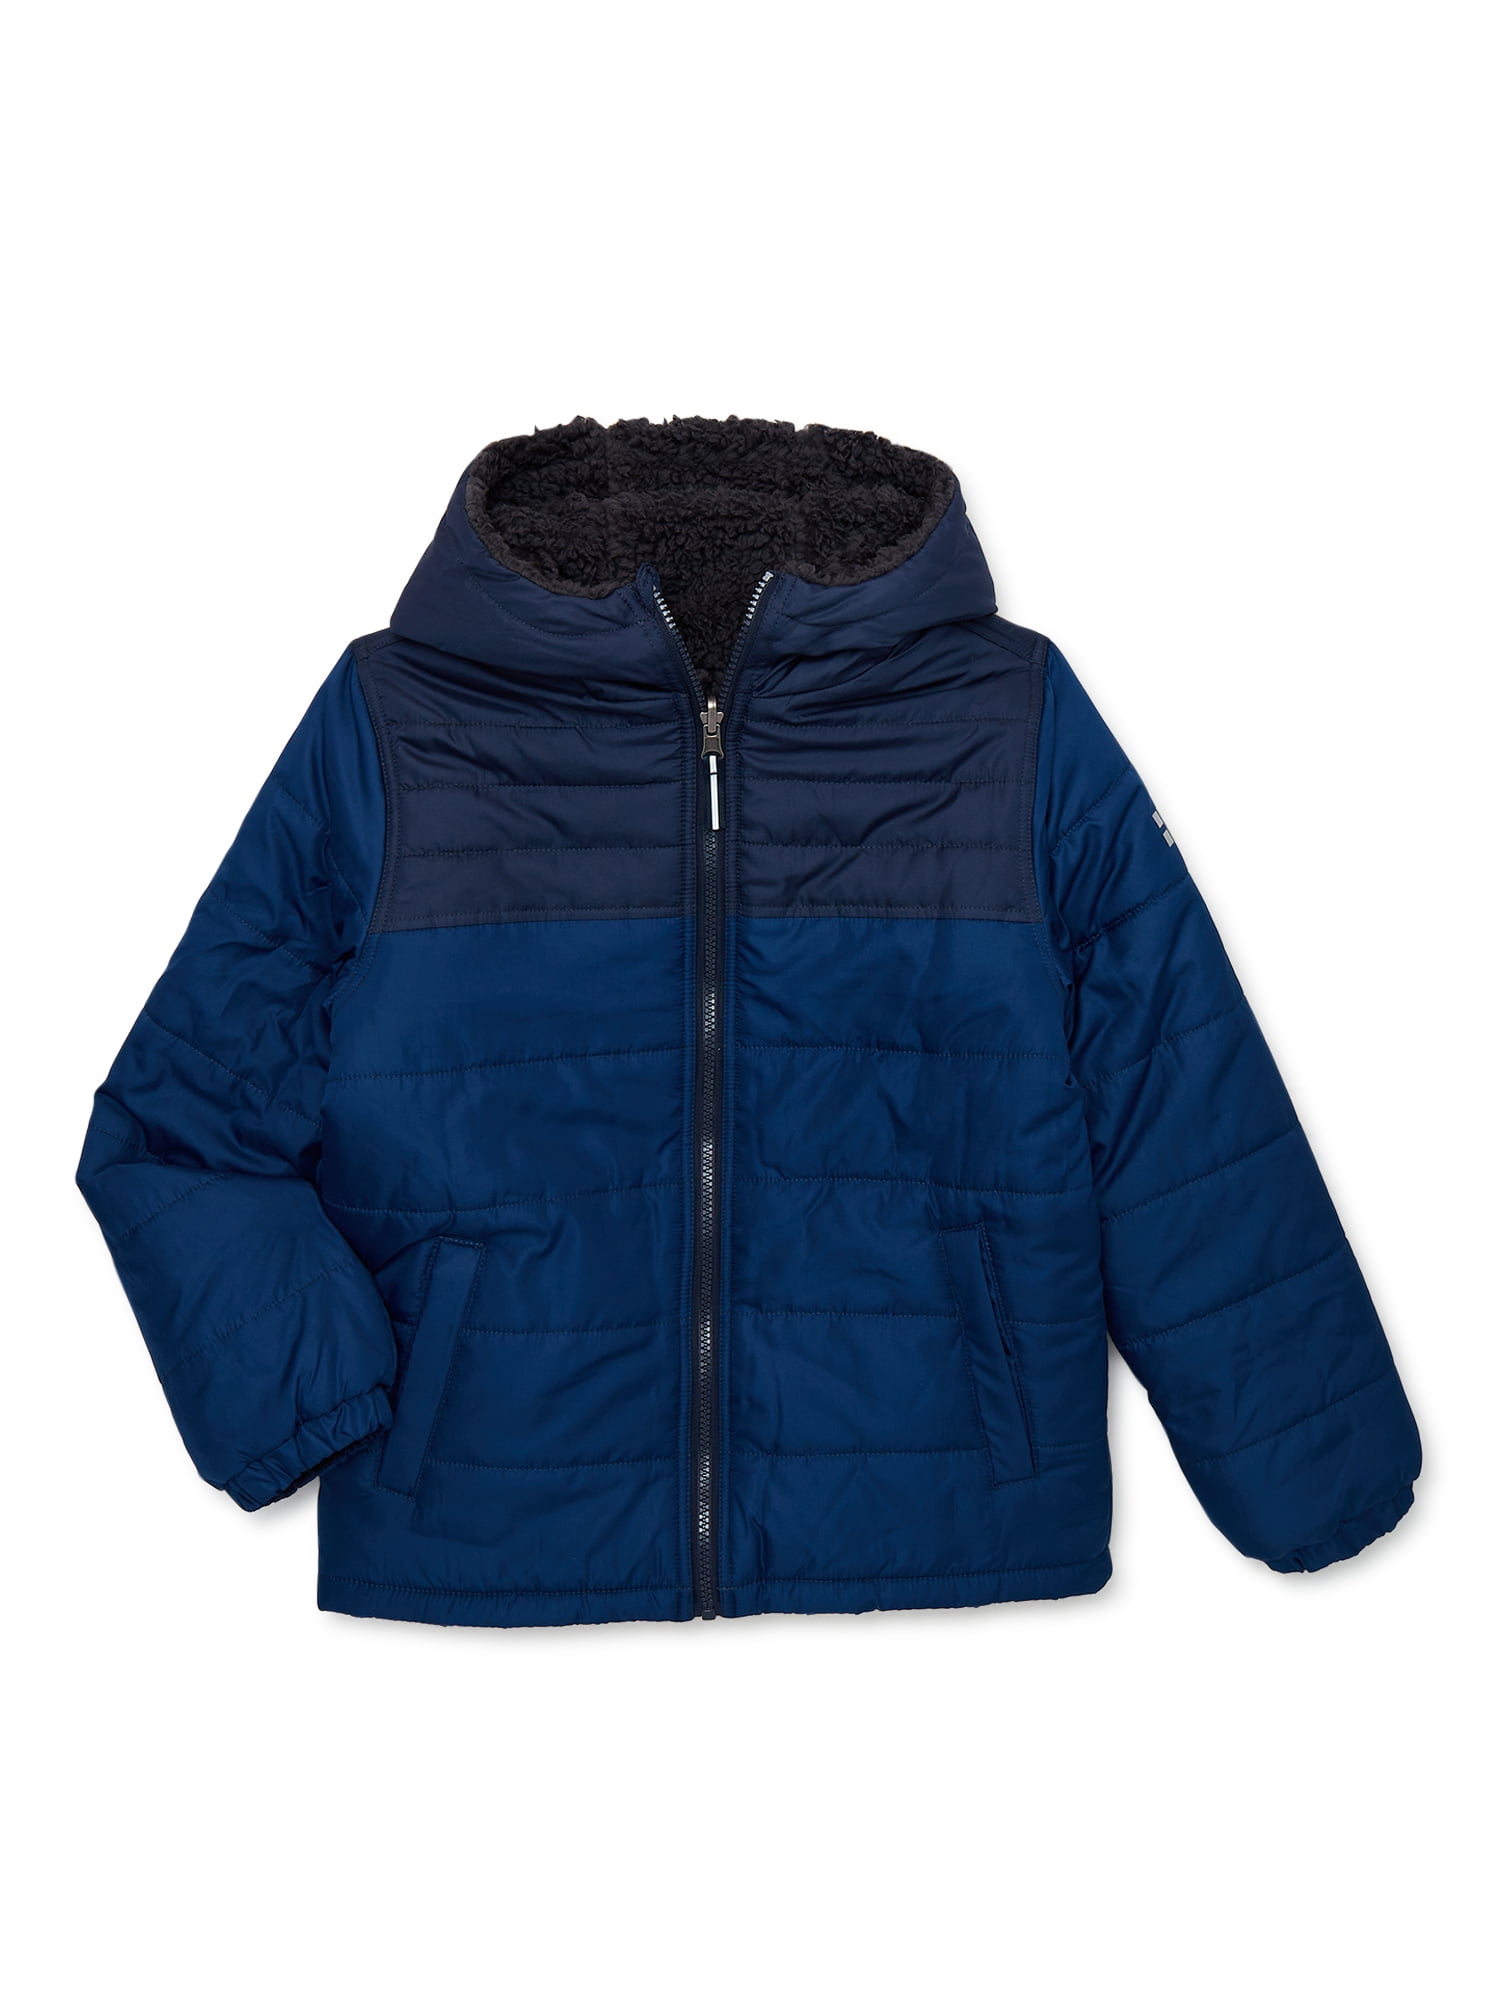 Swiss Alps Boys Reversible Puffer to Faux Sherpa Coat with Hood, Sizes ...